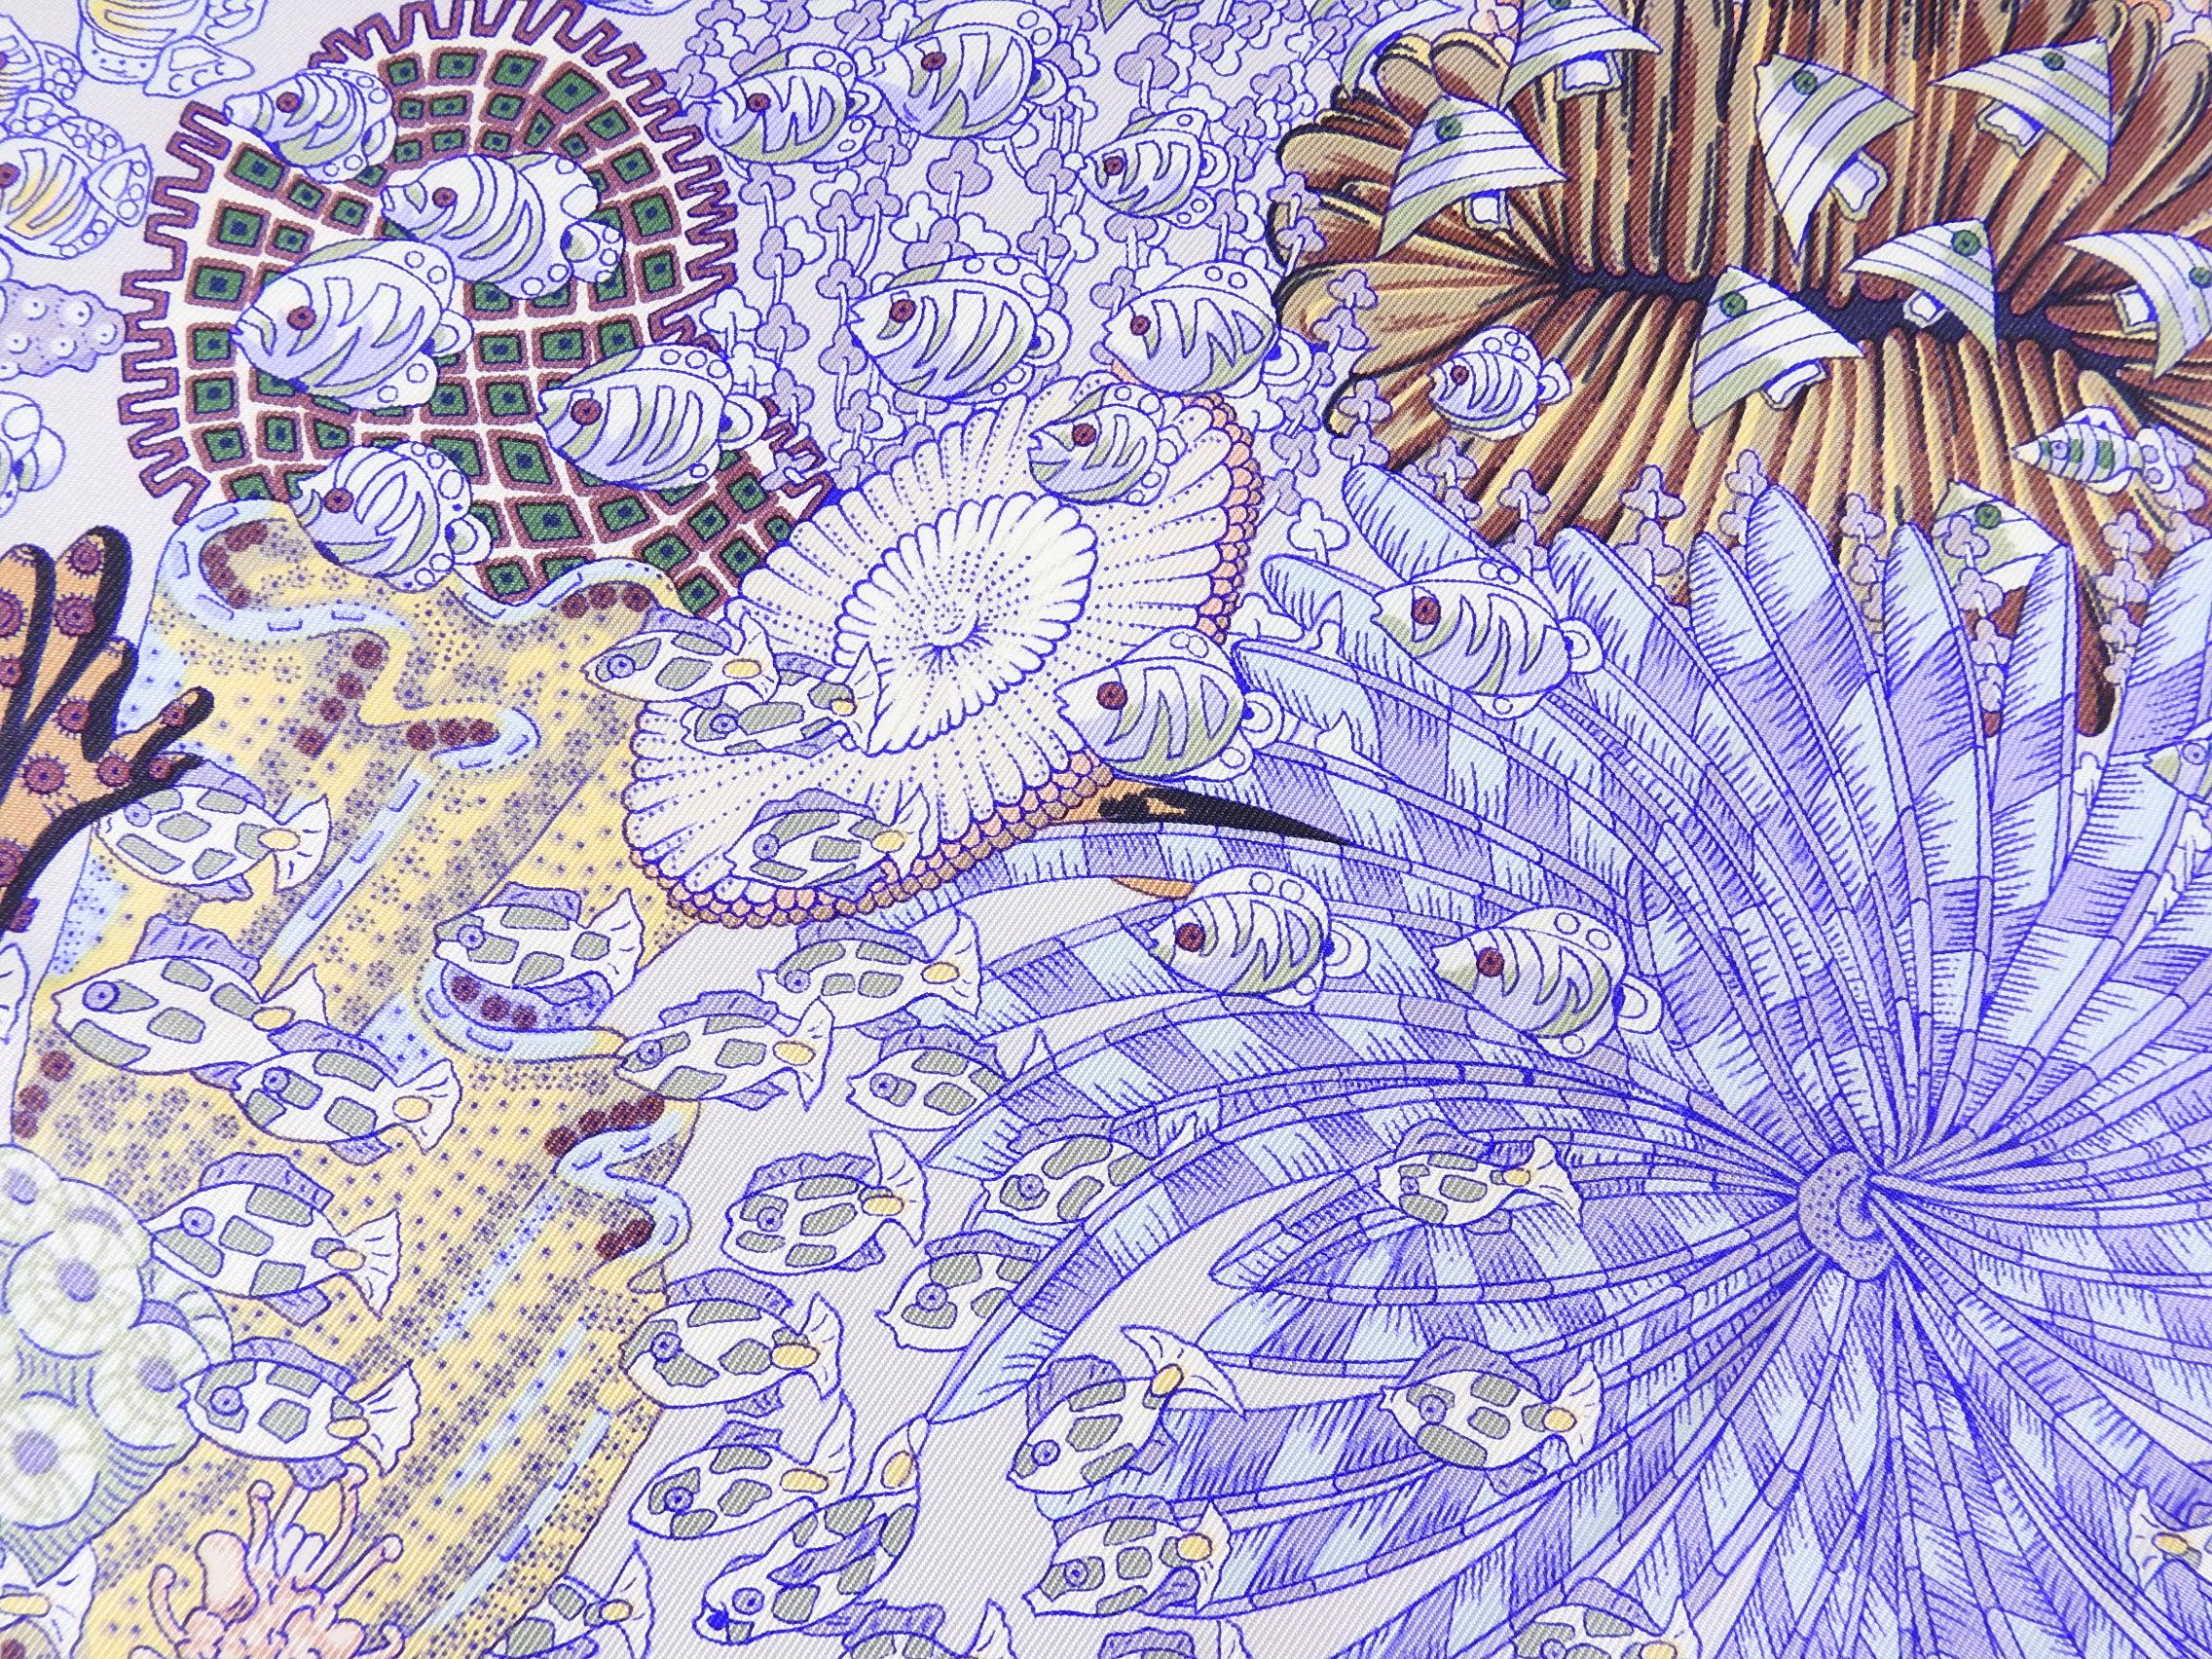 Hermes Rencontre Ocean Light Purple Fishes Silk 90cm Scarf.  Design of tropical school of fish and coral in lavender purple, green, yellow, and plum colors.  Excellent pre-owned condition.